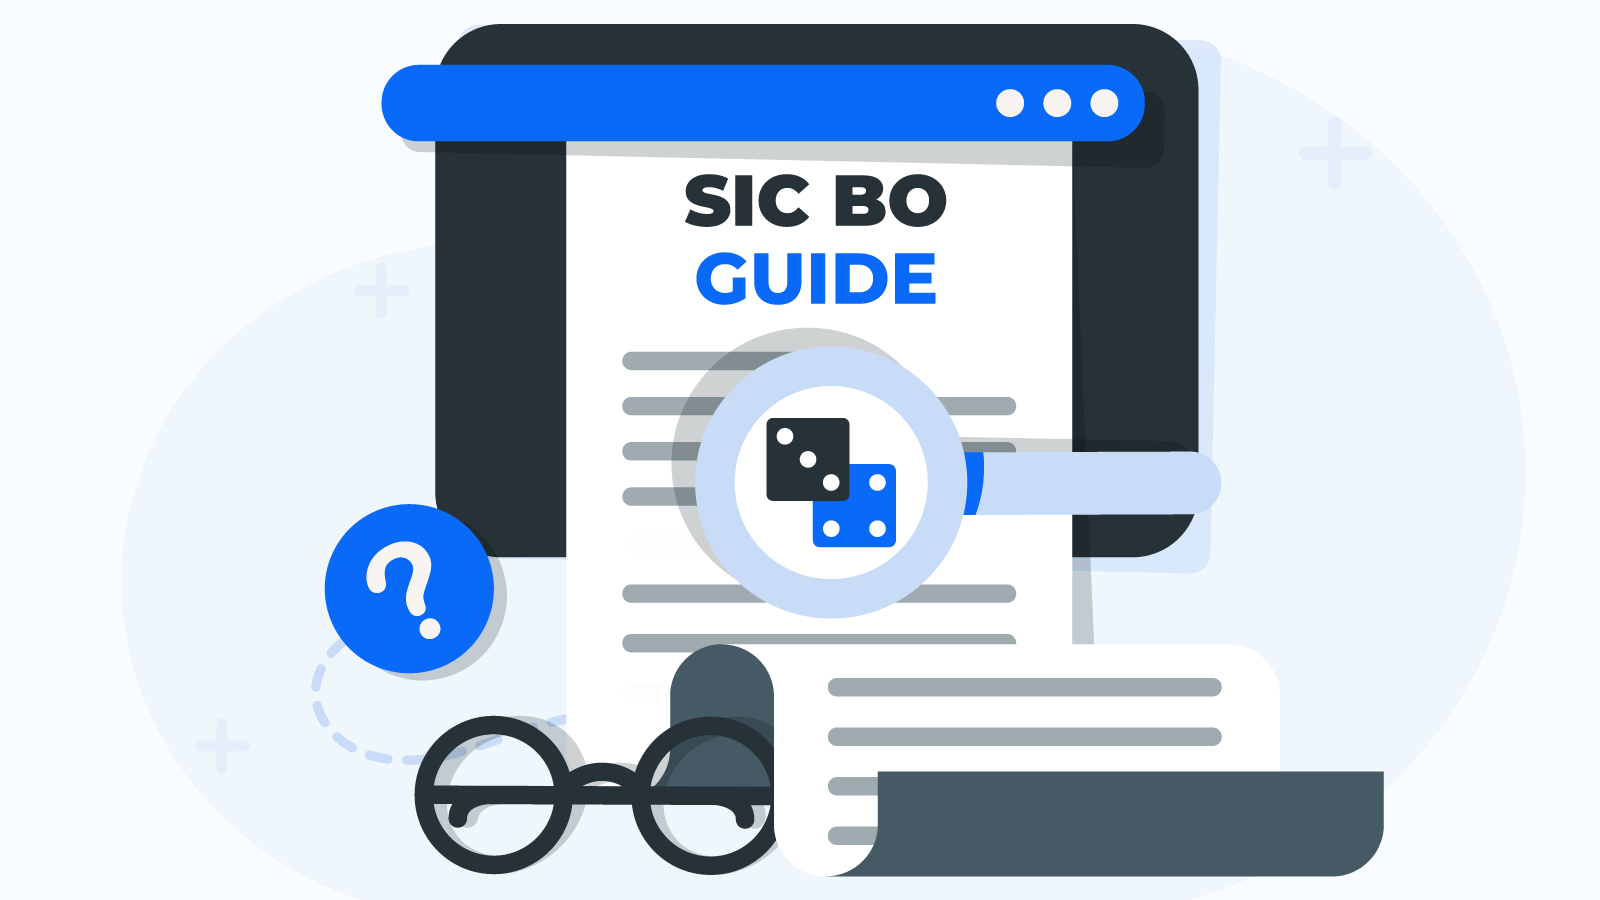 How to play Sic Bo a step-by-step guide